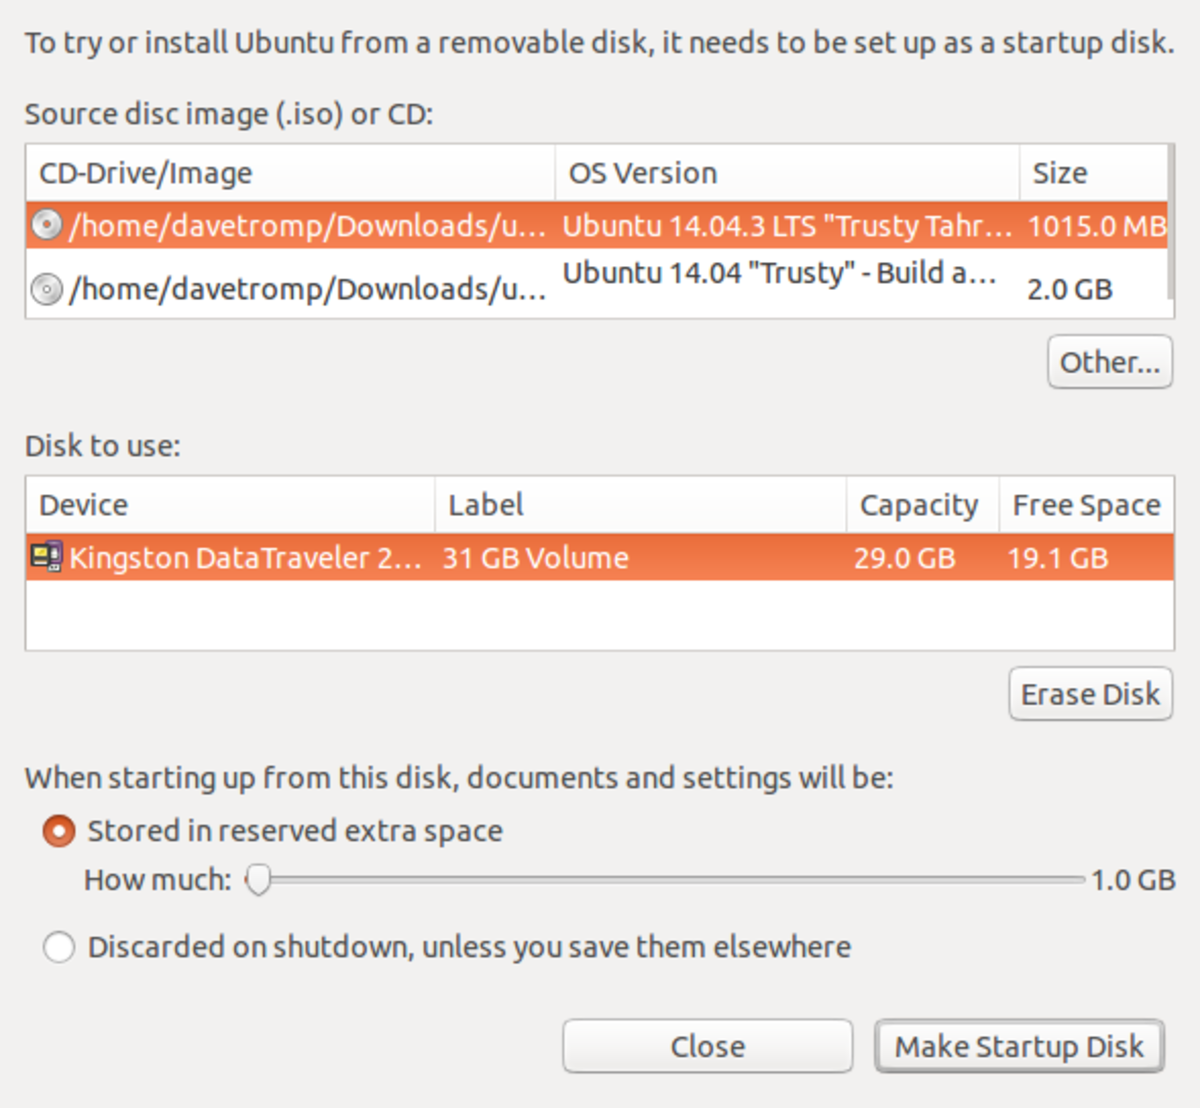 Selecting the start up disk